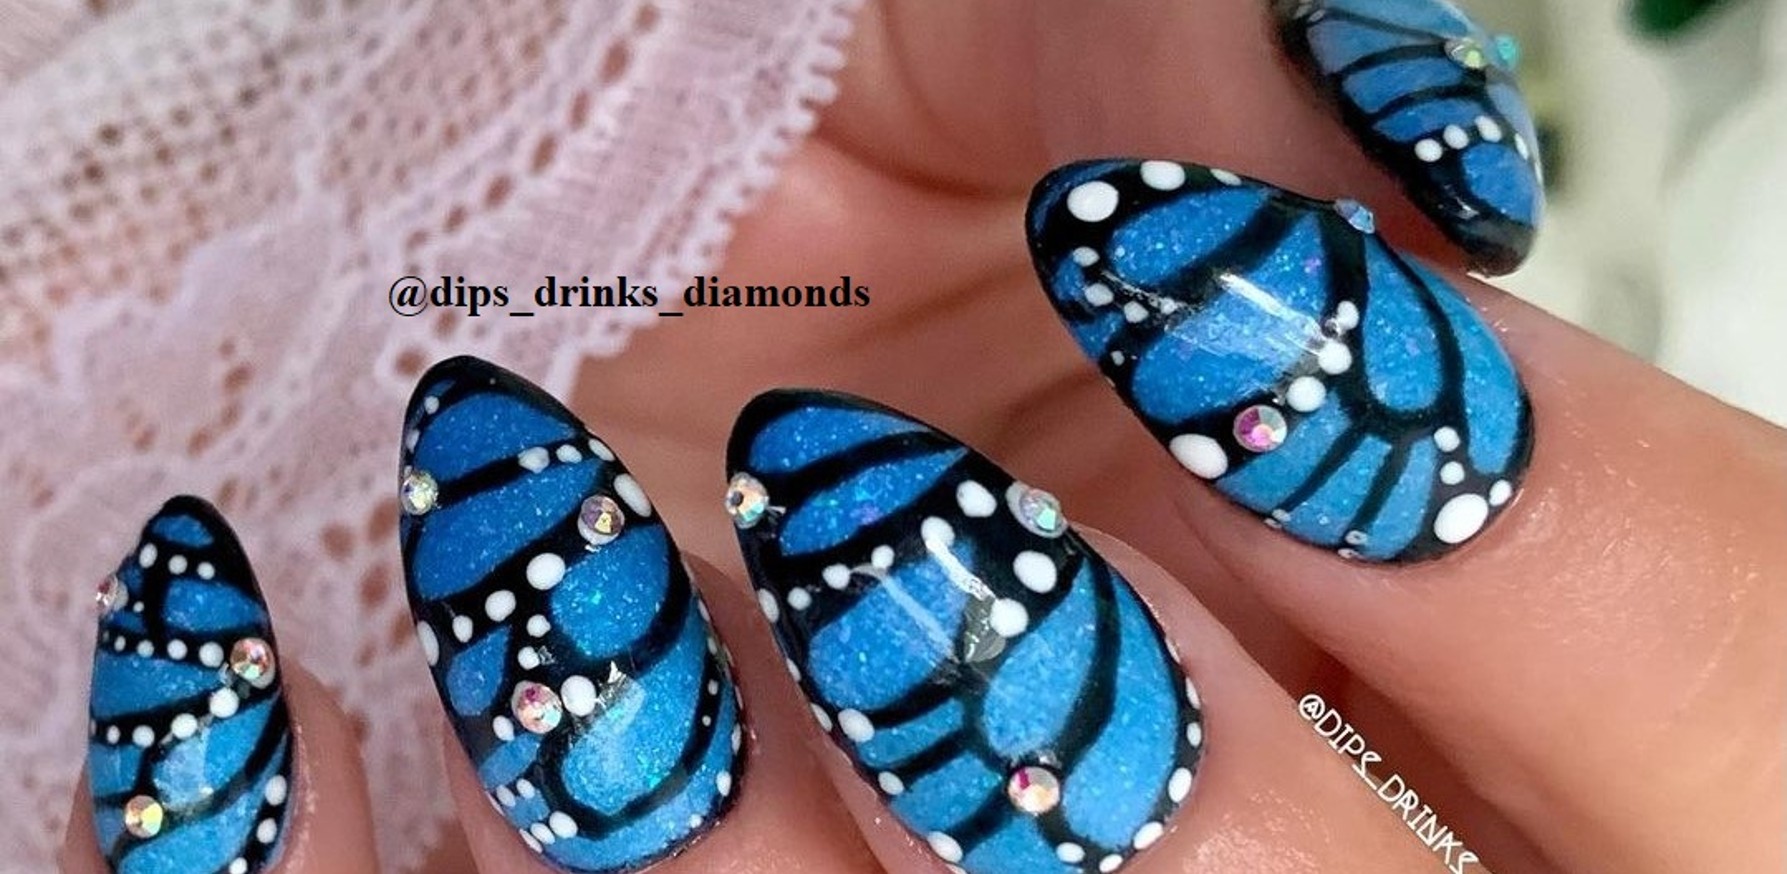 Butterfly Nails Are The Talk Of The Town RN